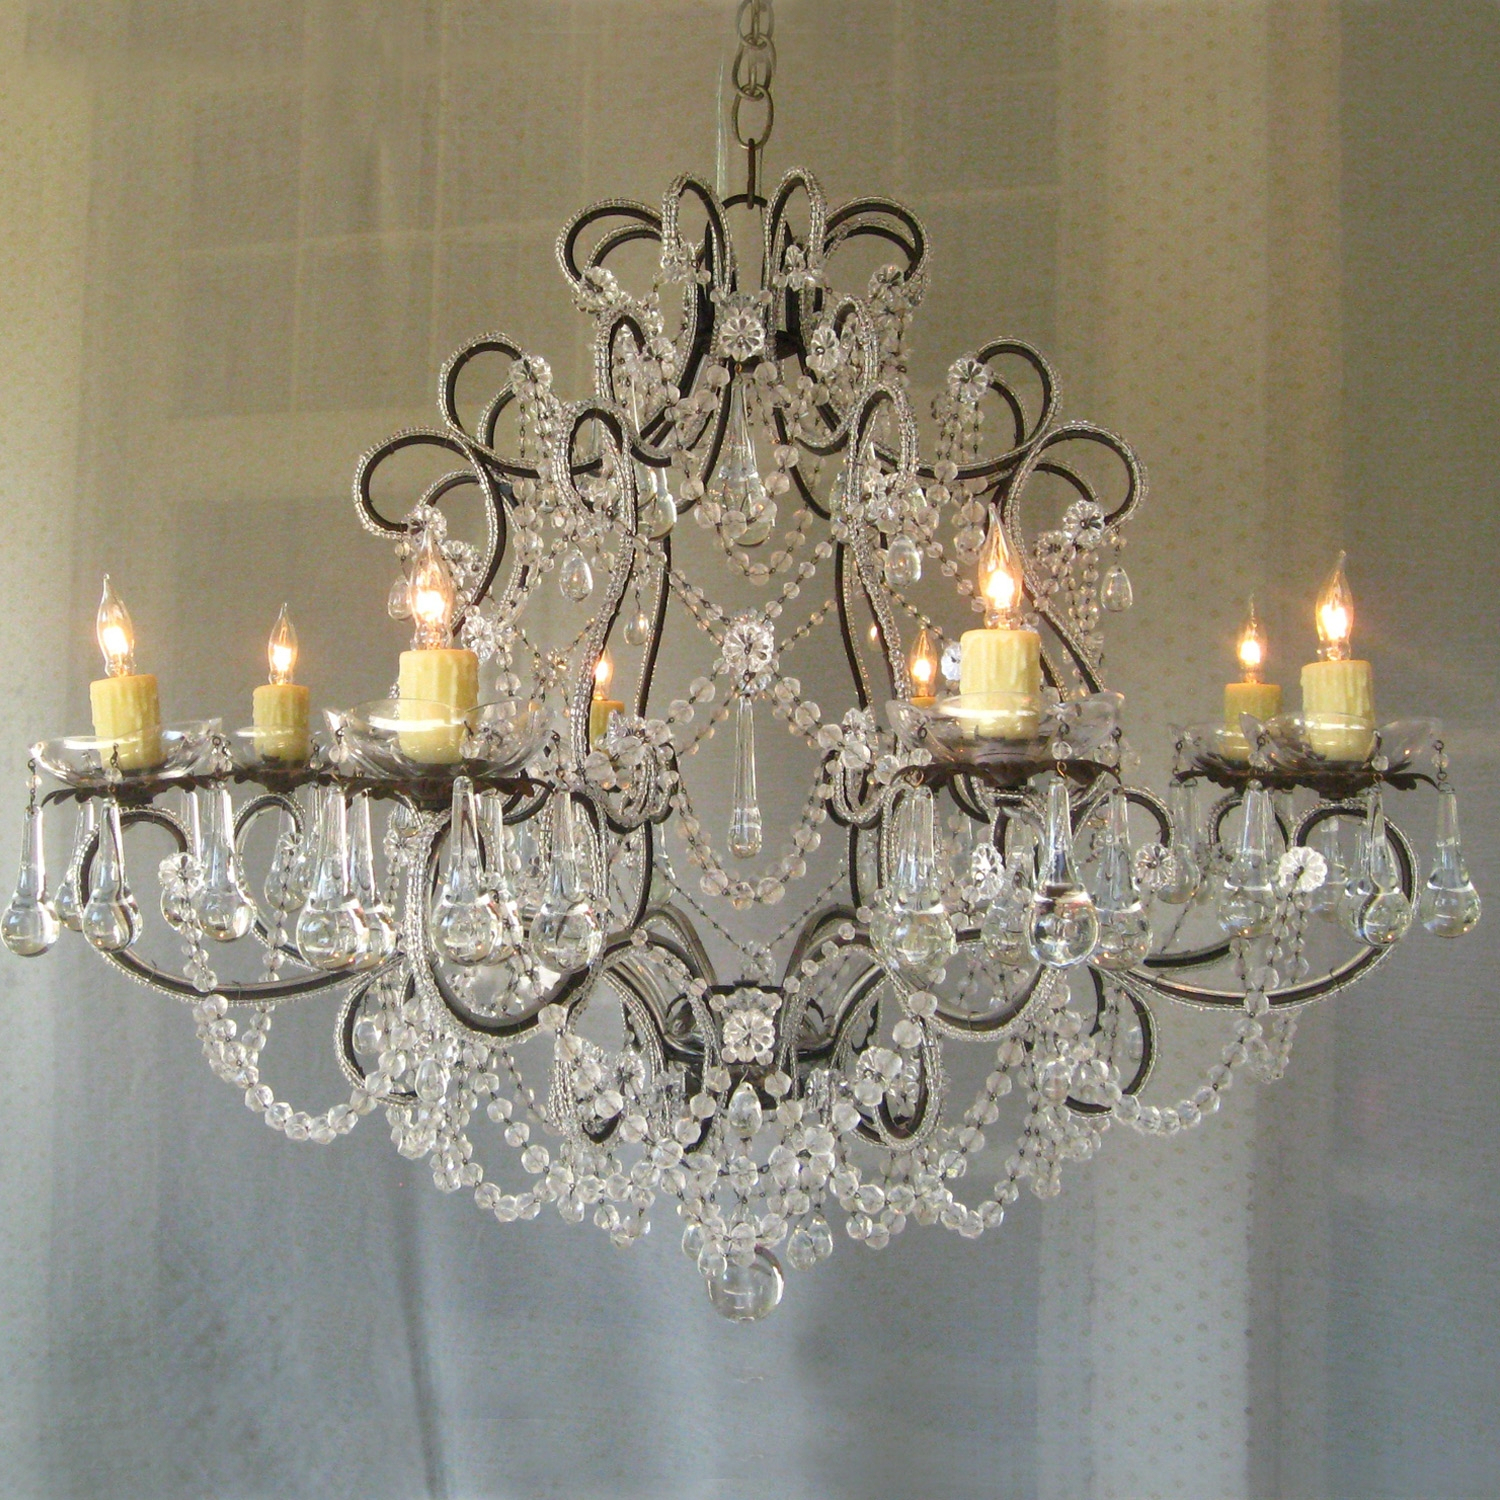 12 Collection Of Small Shabby Chic Chandelier serapportantà Shabby Chic Chandeliers 